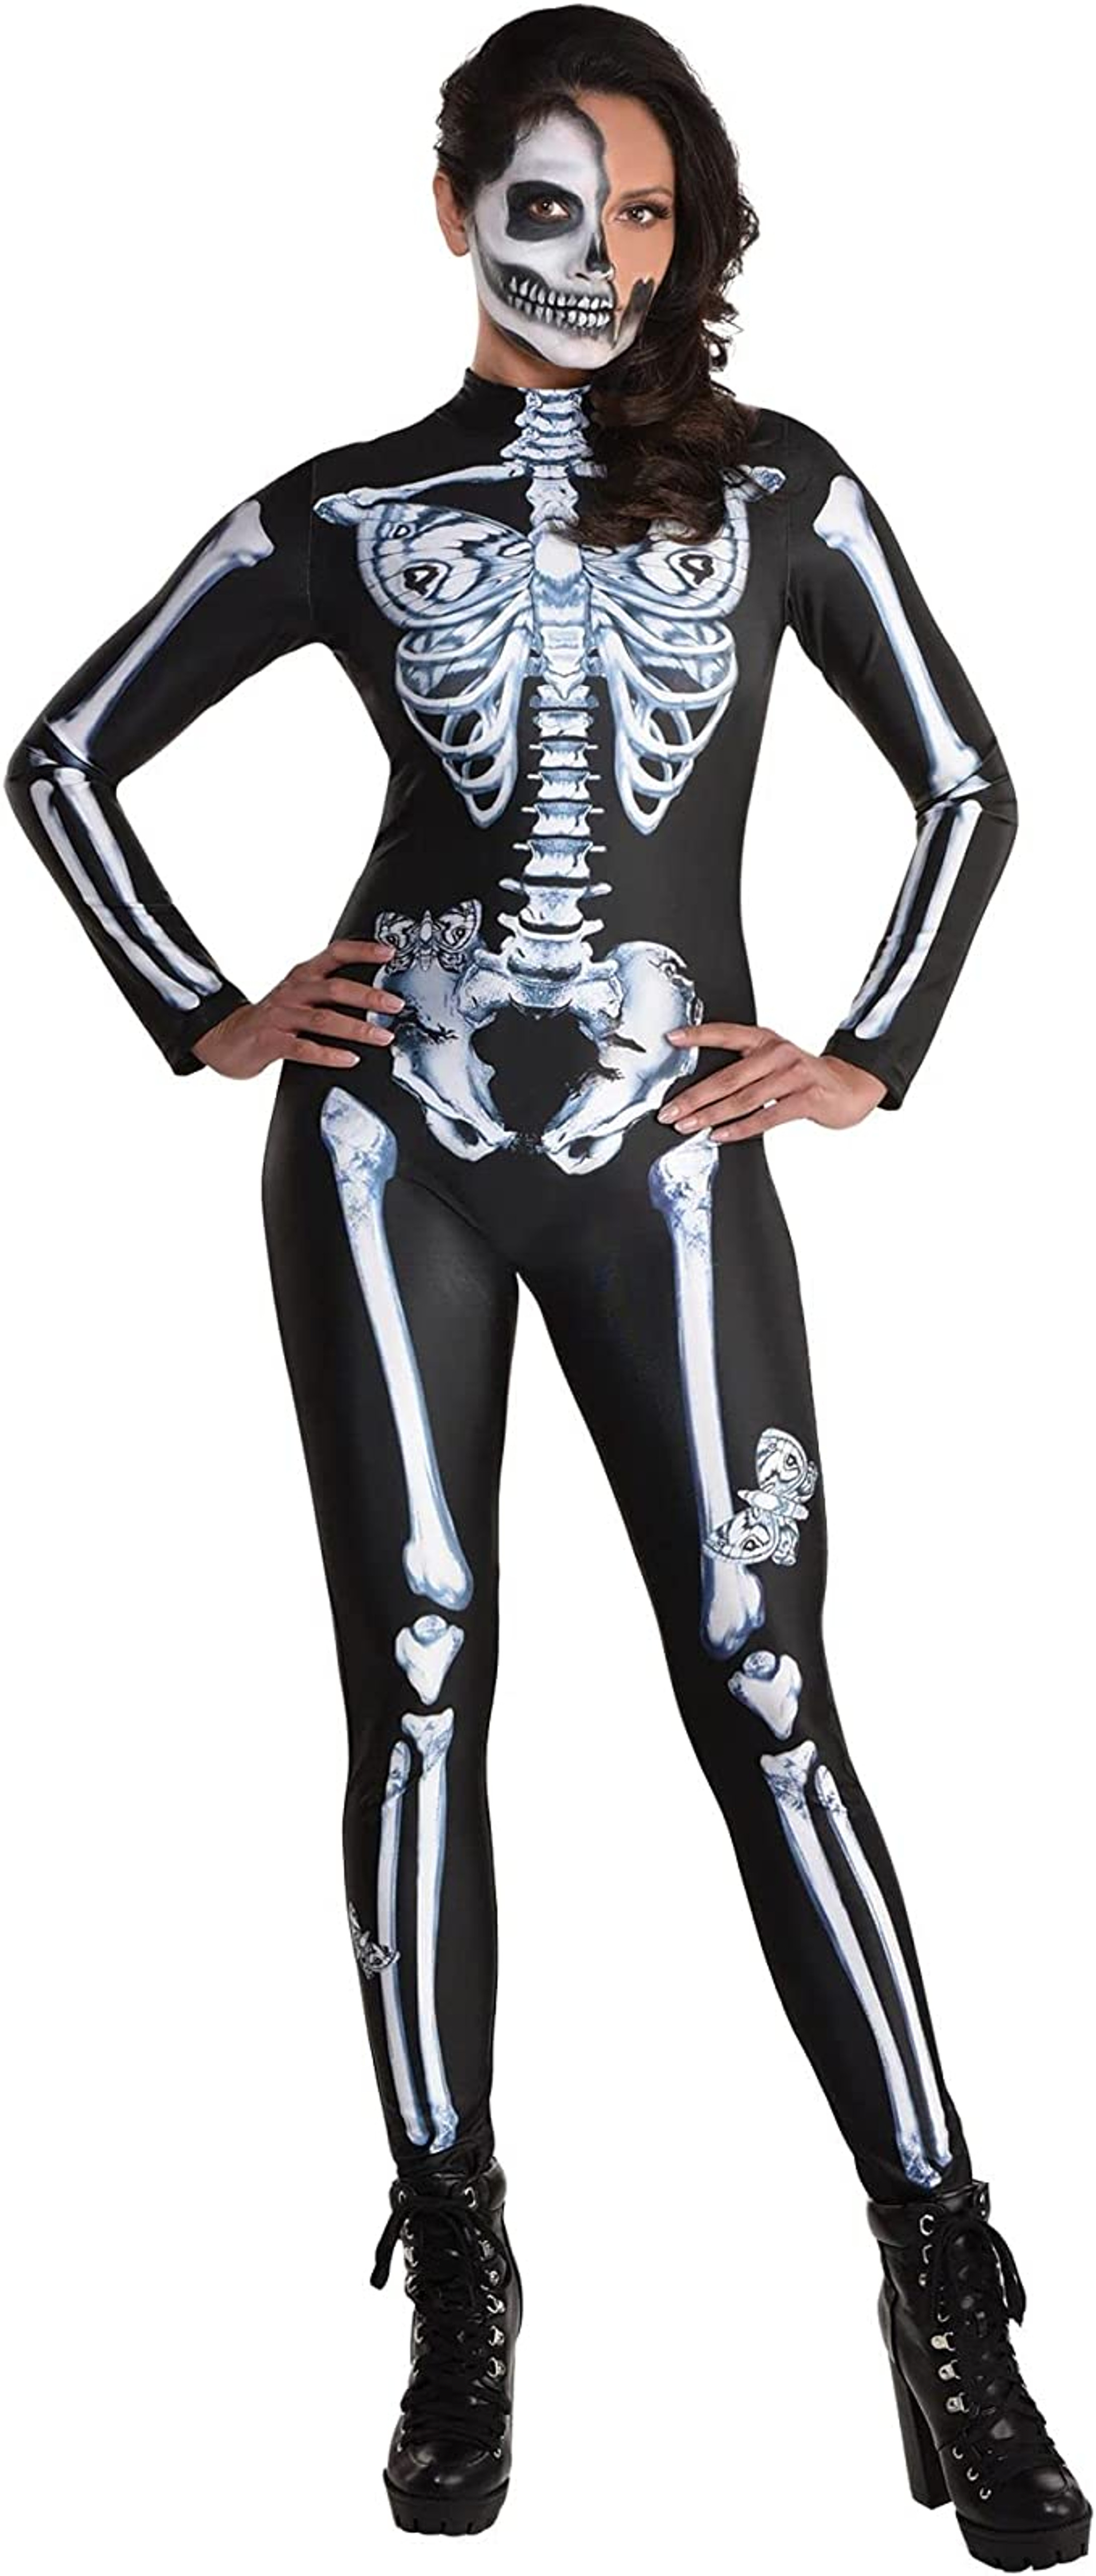 Shop Costumes for Women - Halloween & More